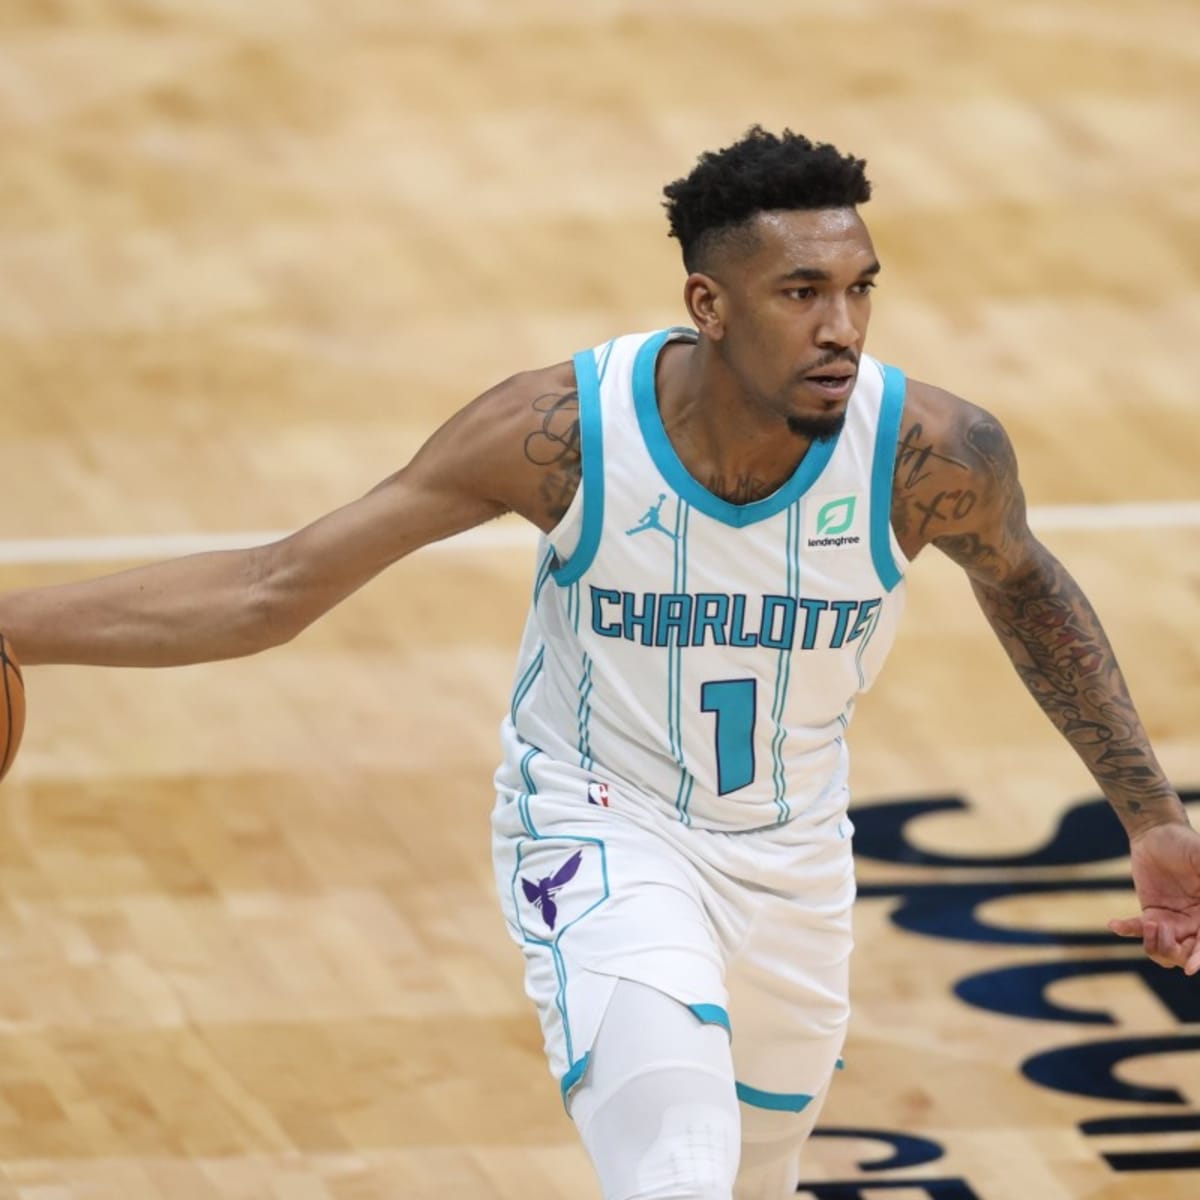 From Charlotte To New Orleans: The Hornets' Franchise Relocation